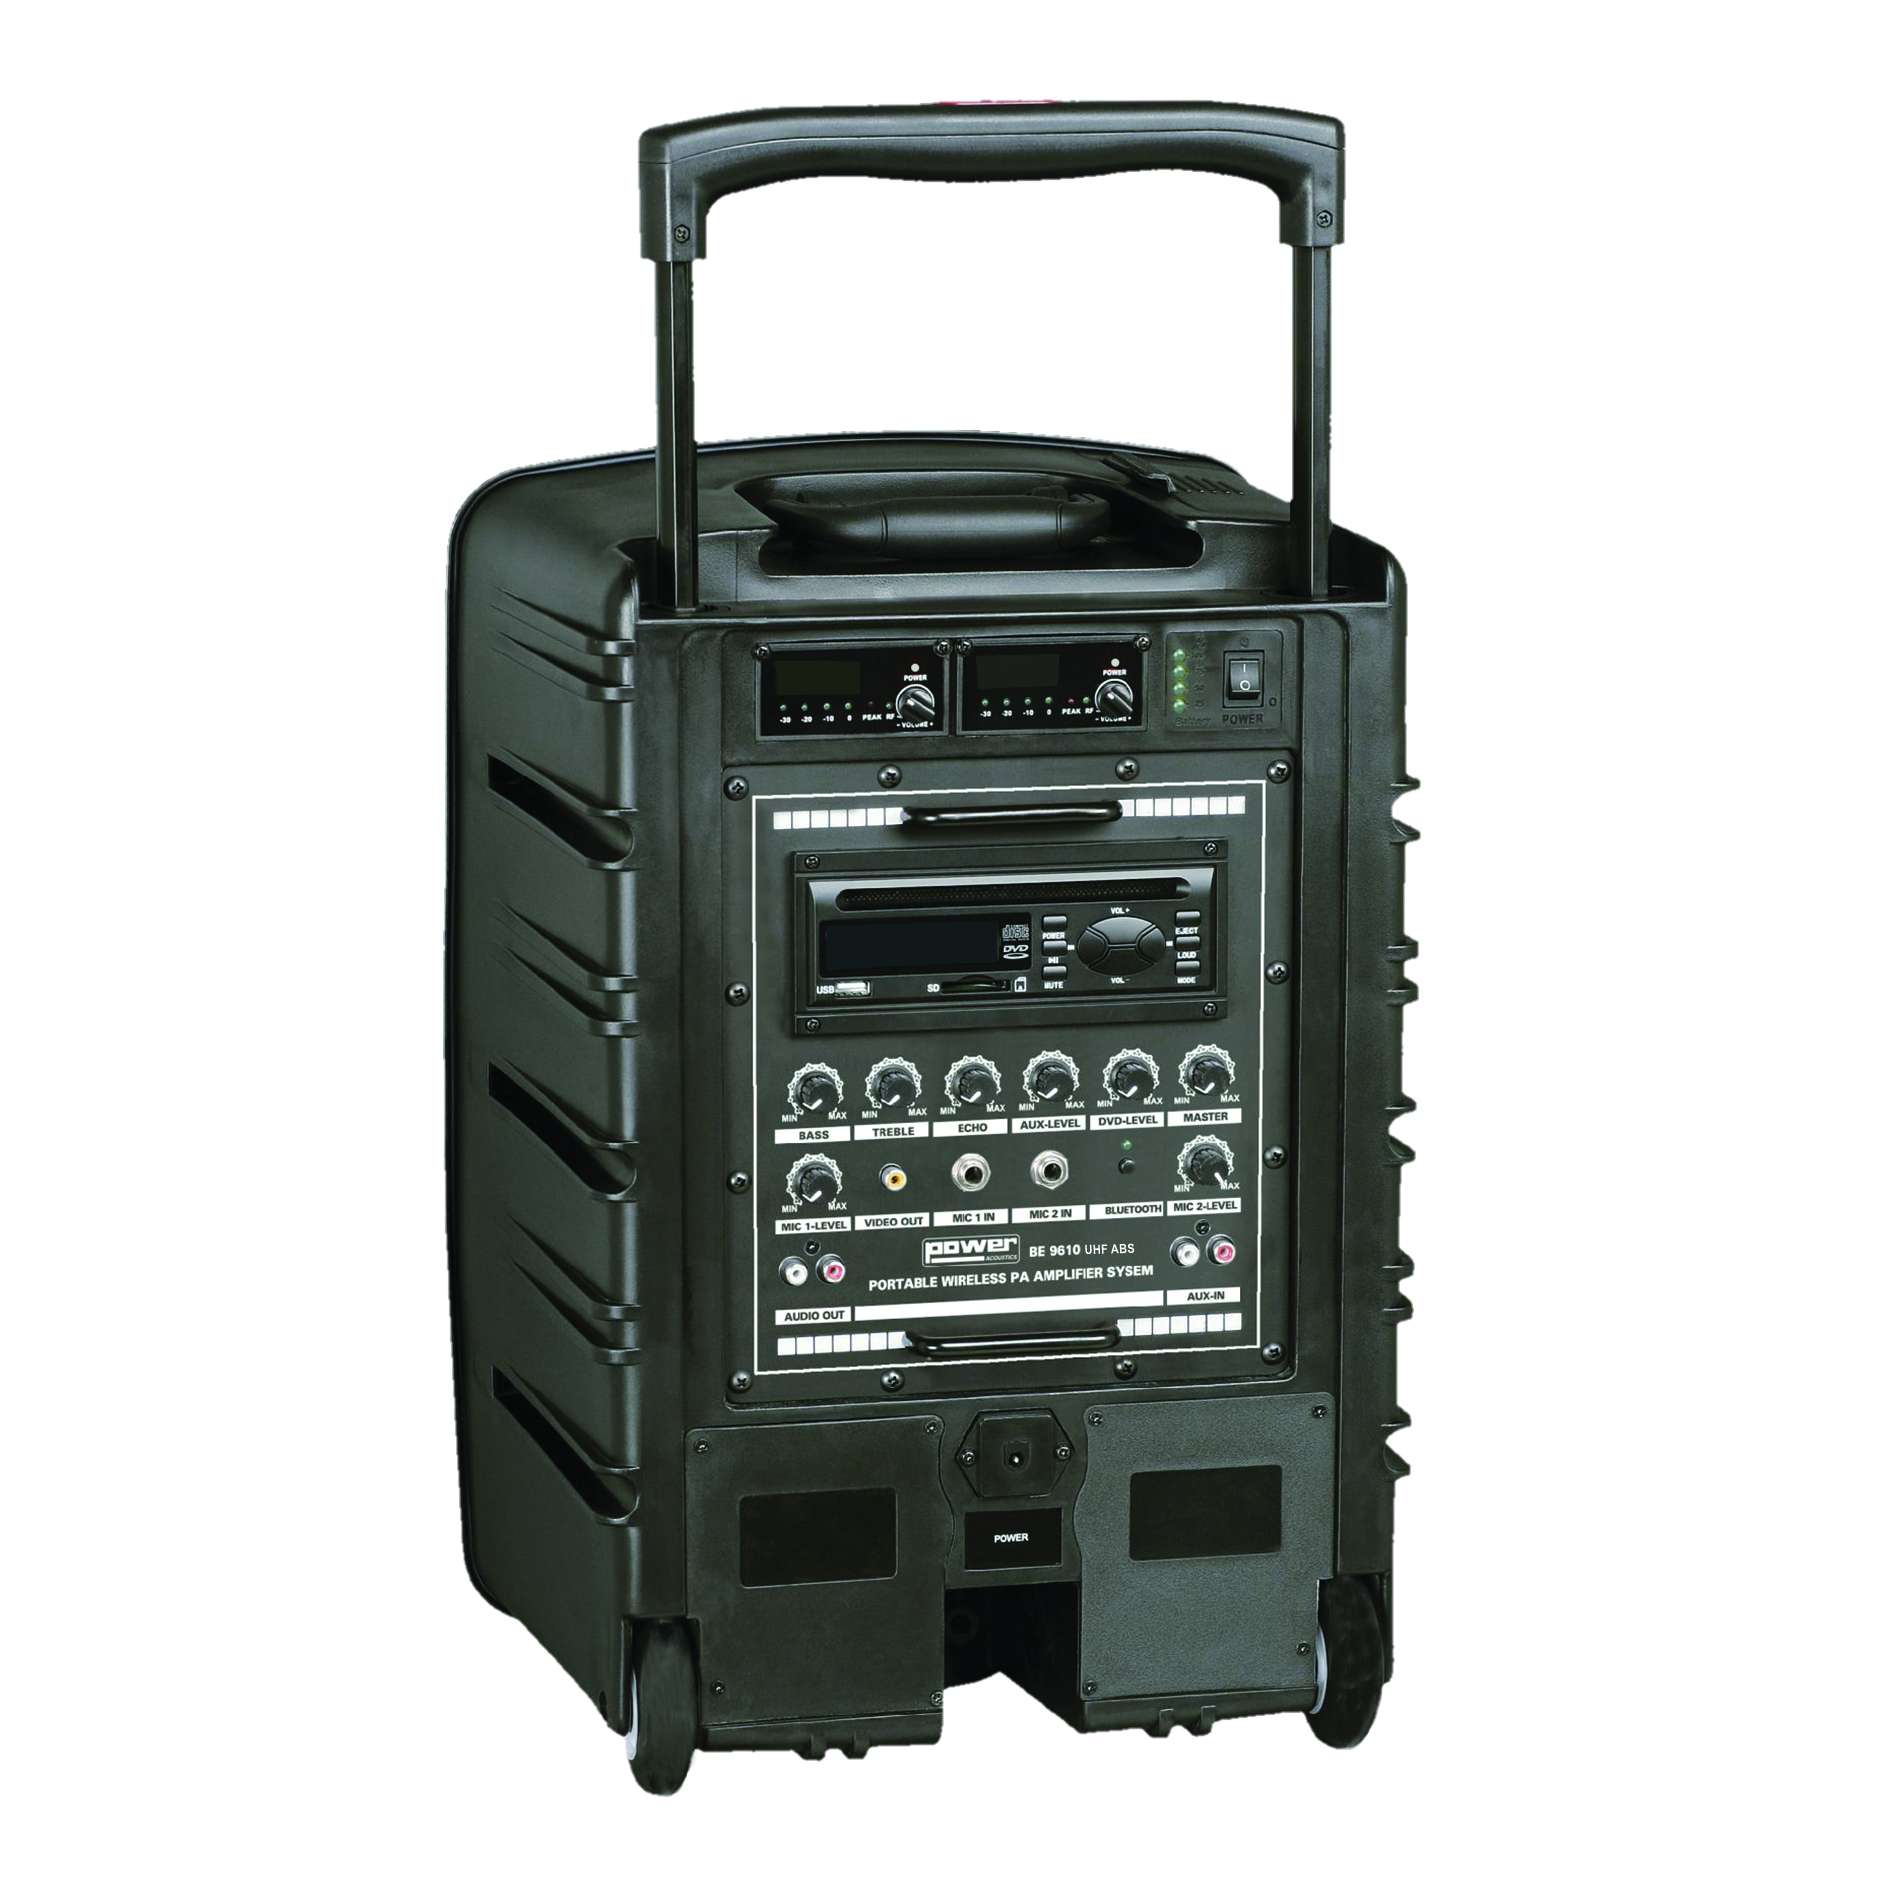 Power Acoustics Be 9610 Uhf Abs - Portable PA system - Variation 1